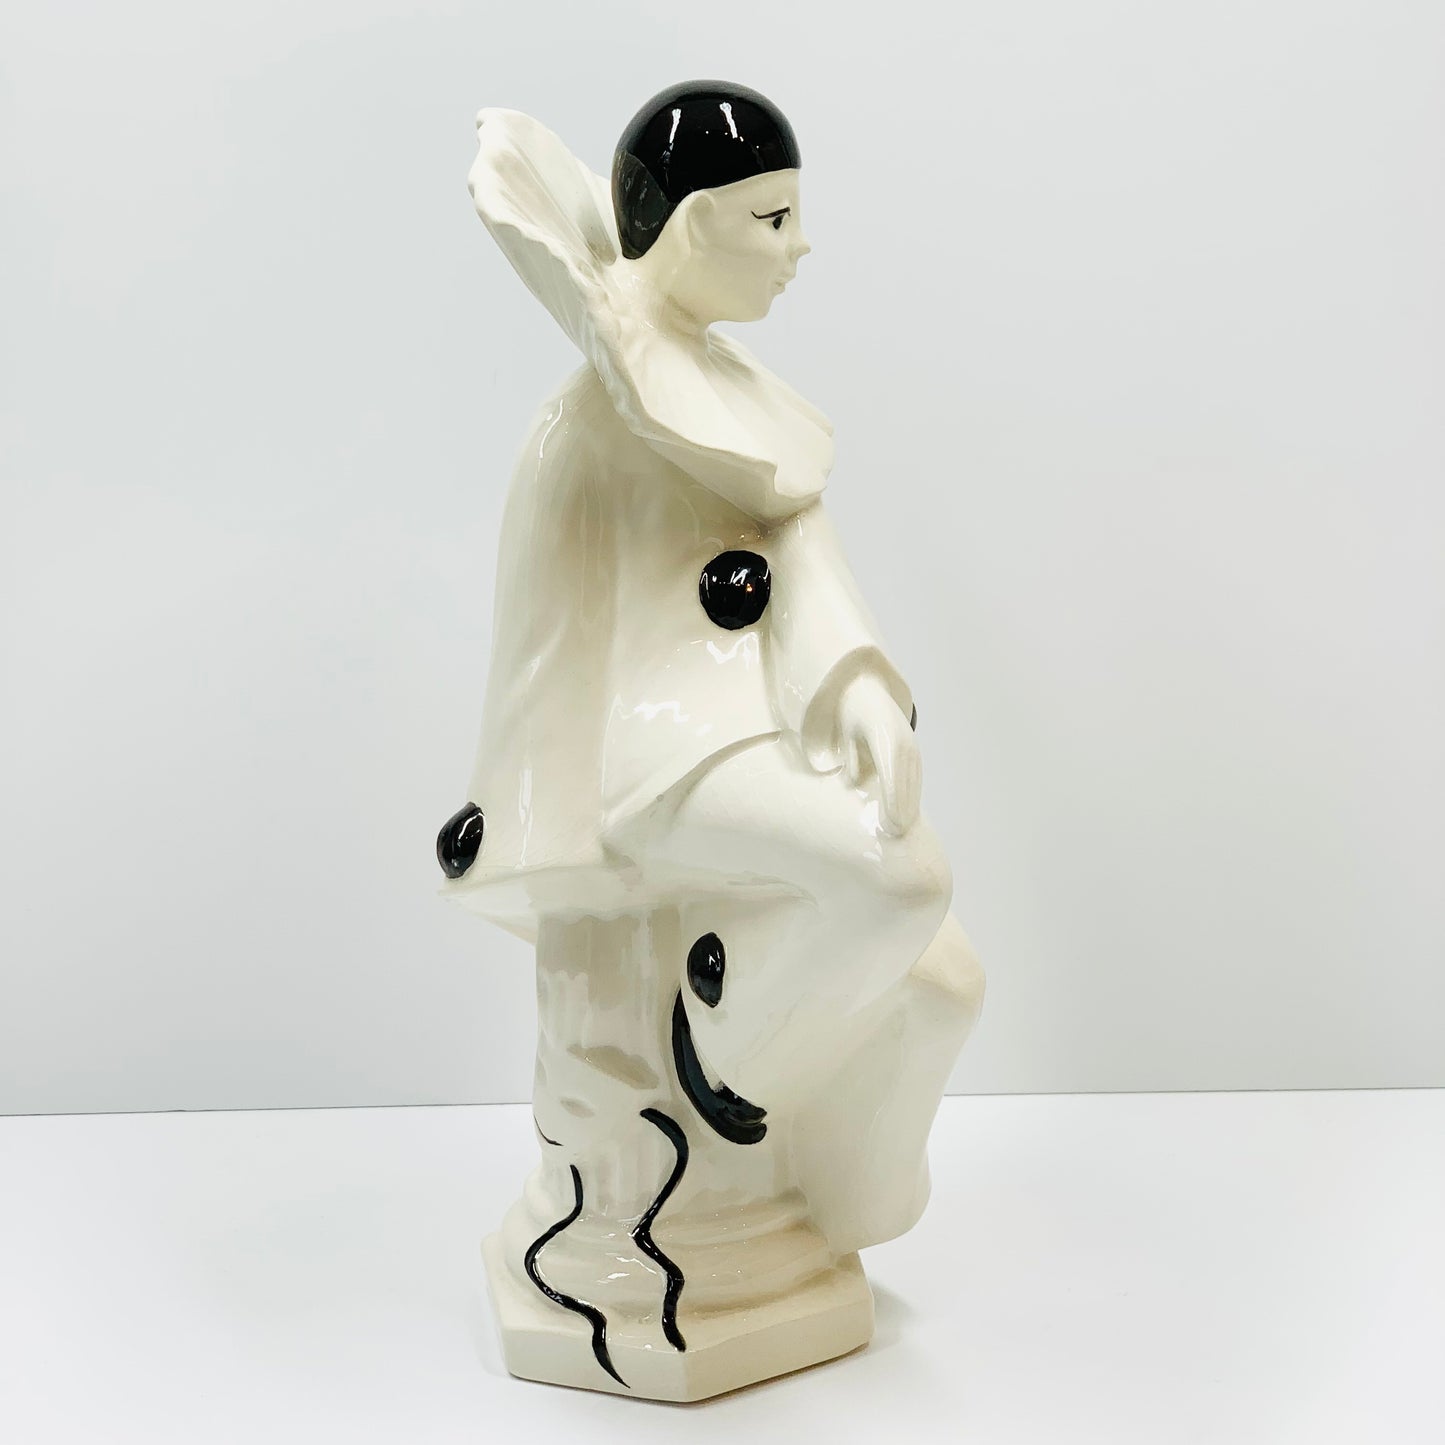 1980s white and black porcelain pantomime figurine